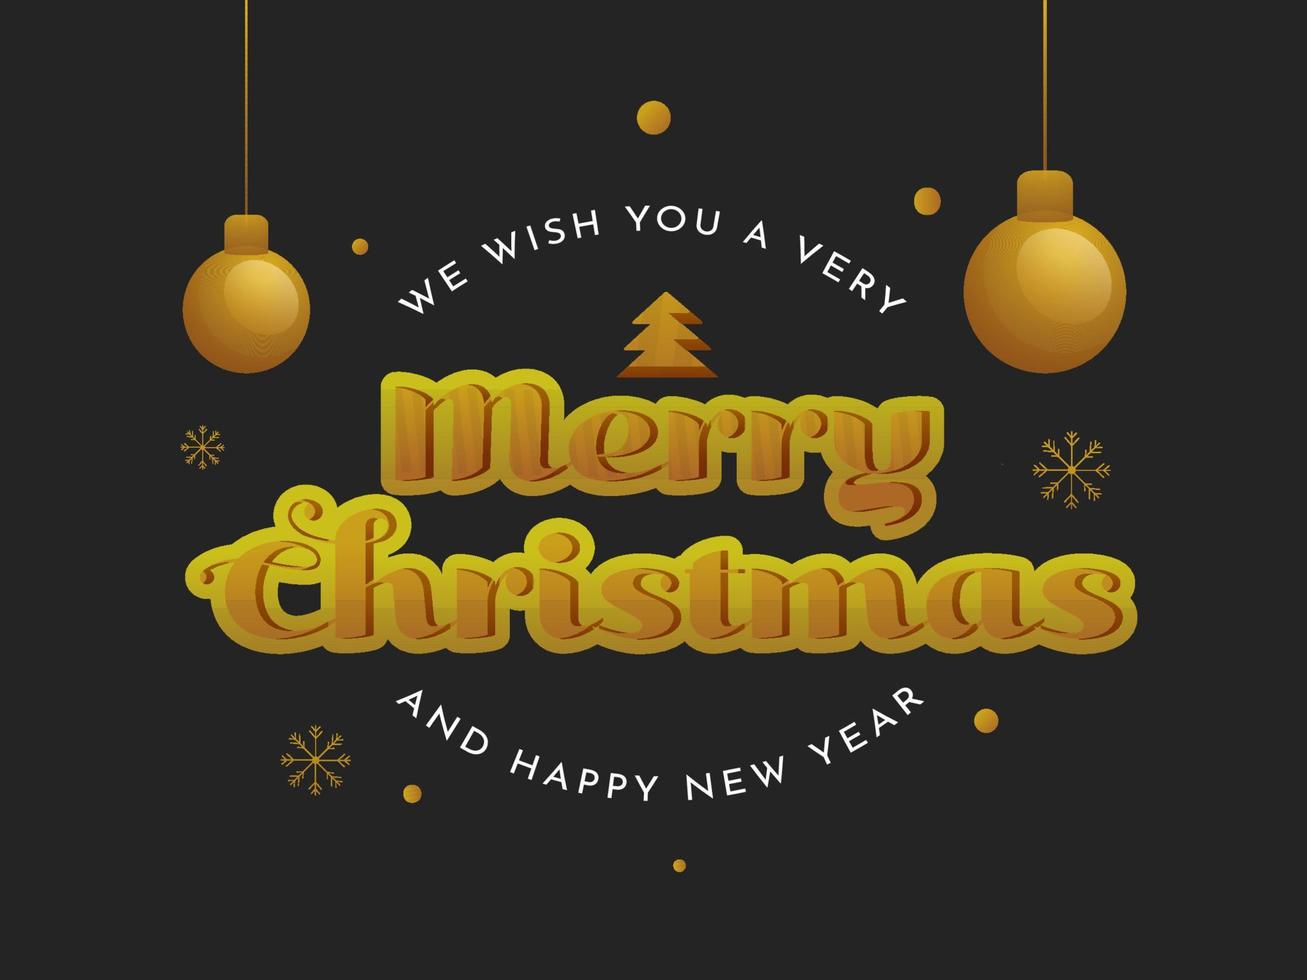 We Wish You A Very Merry Christmas And Happy New Year Text on Black Background Decorated with Snowflakes, Hanging Baubles. vector